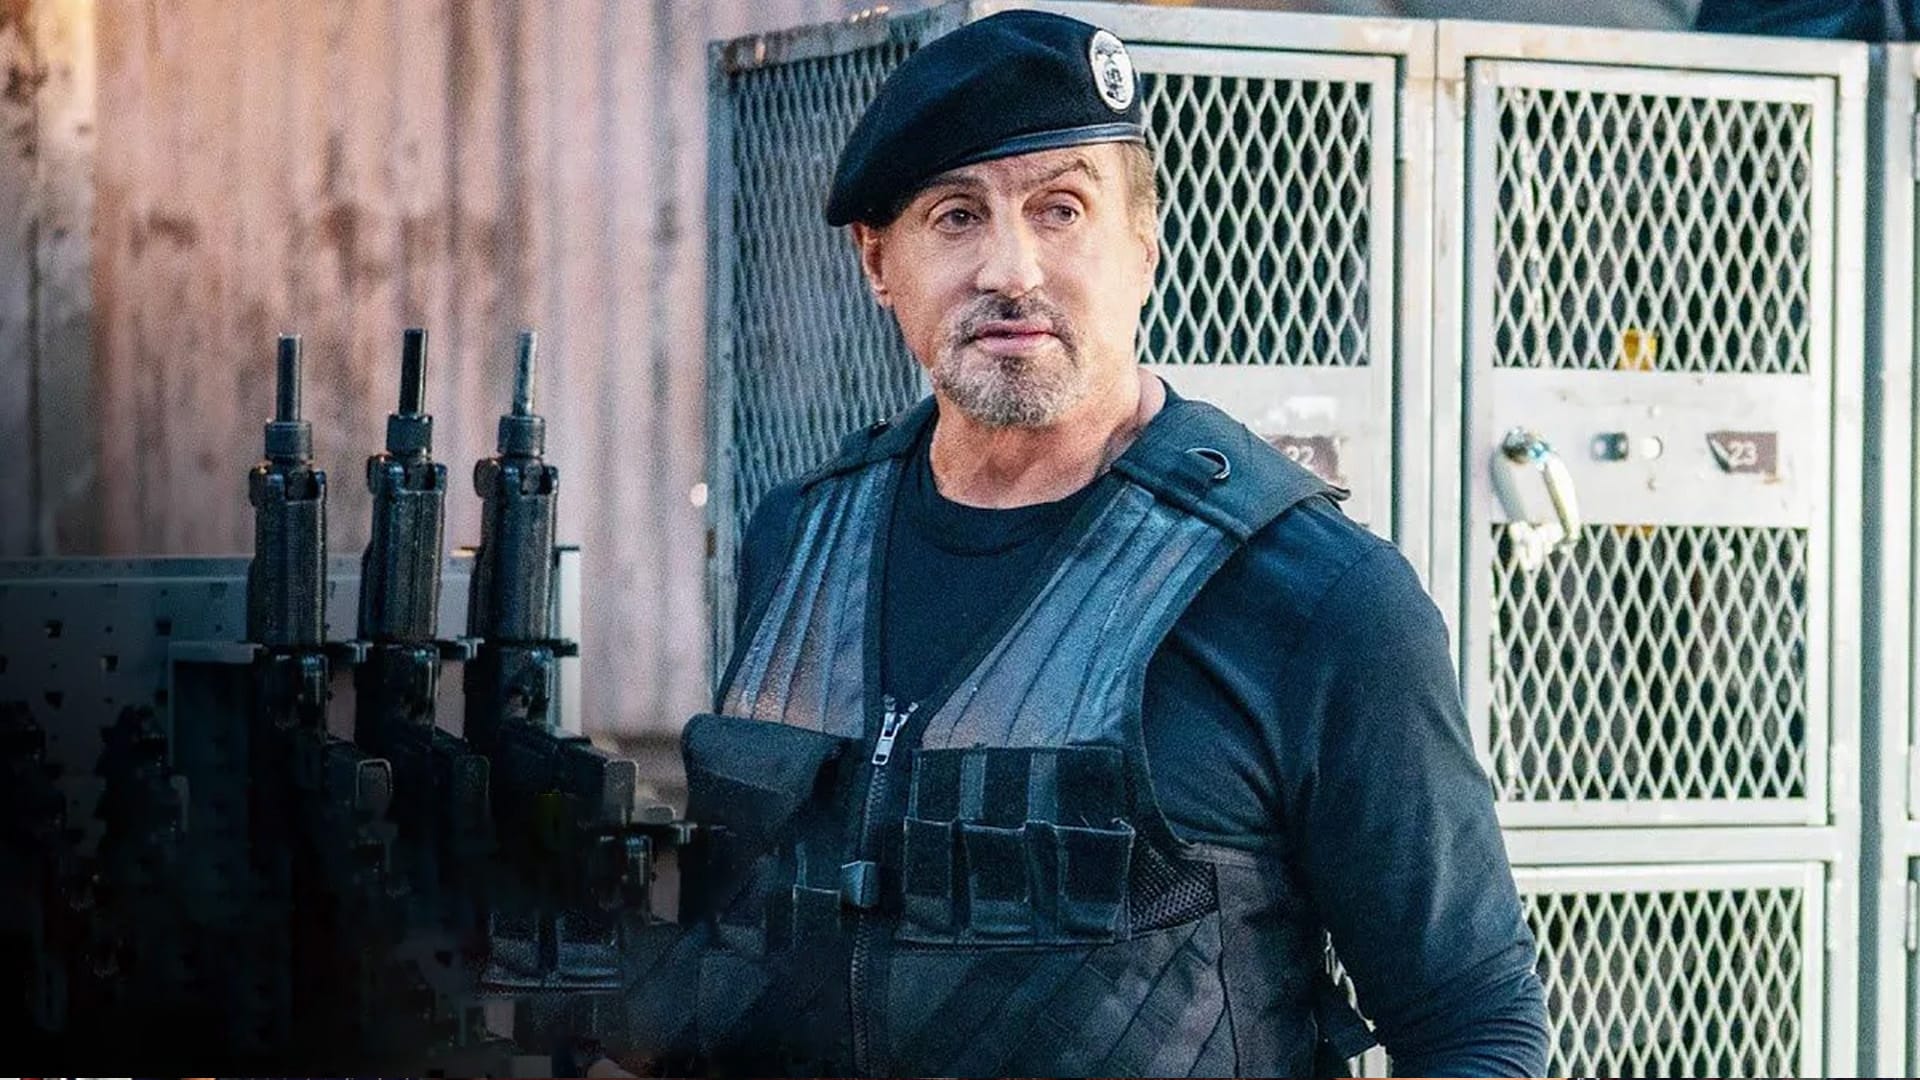 expendables 4 trailer